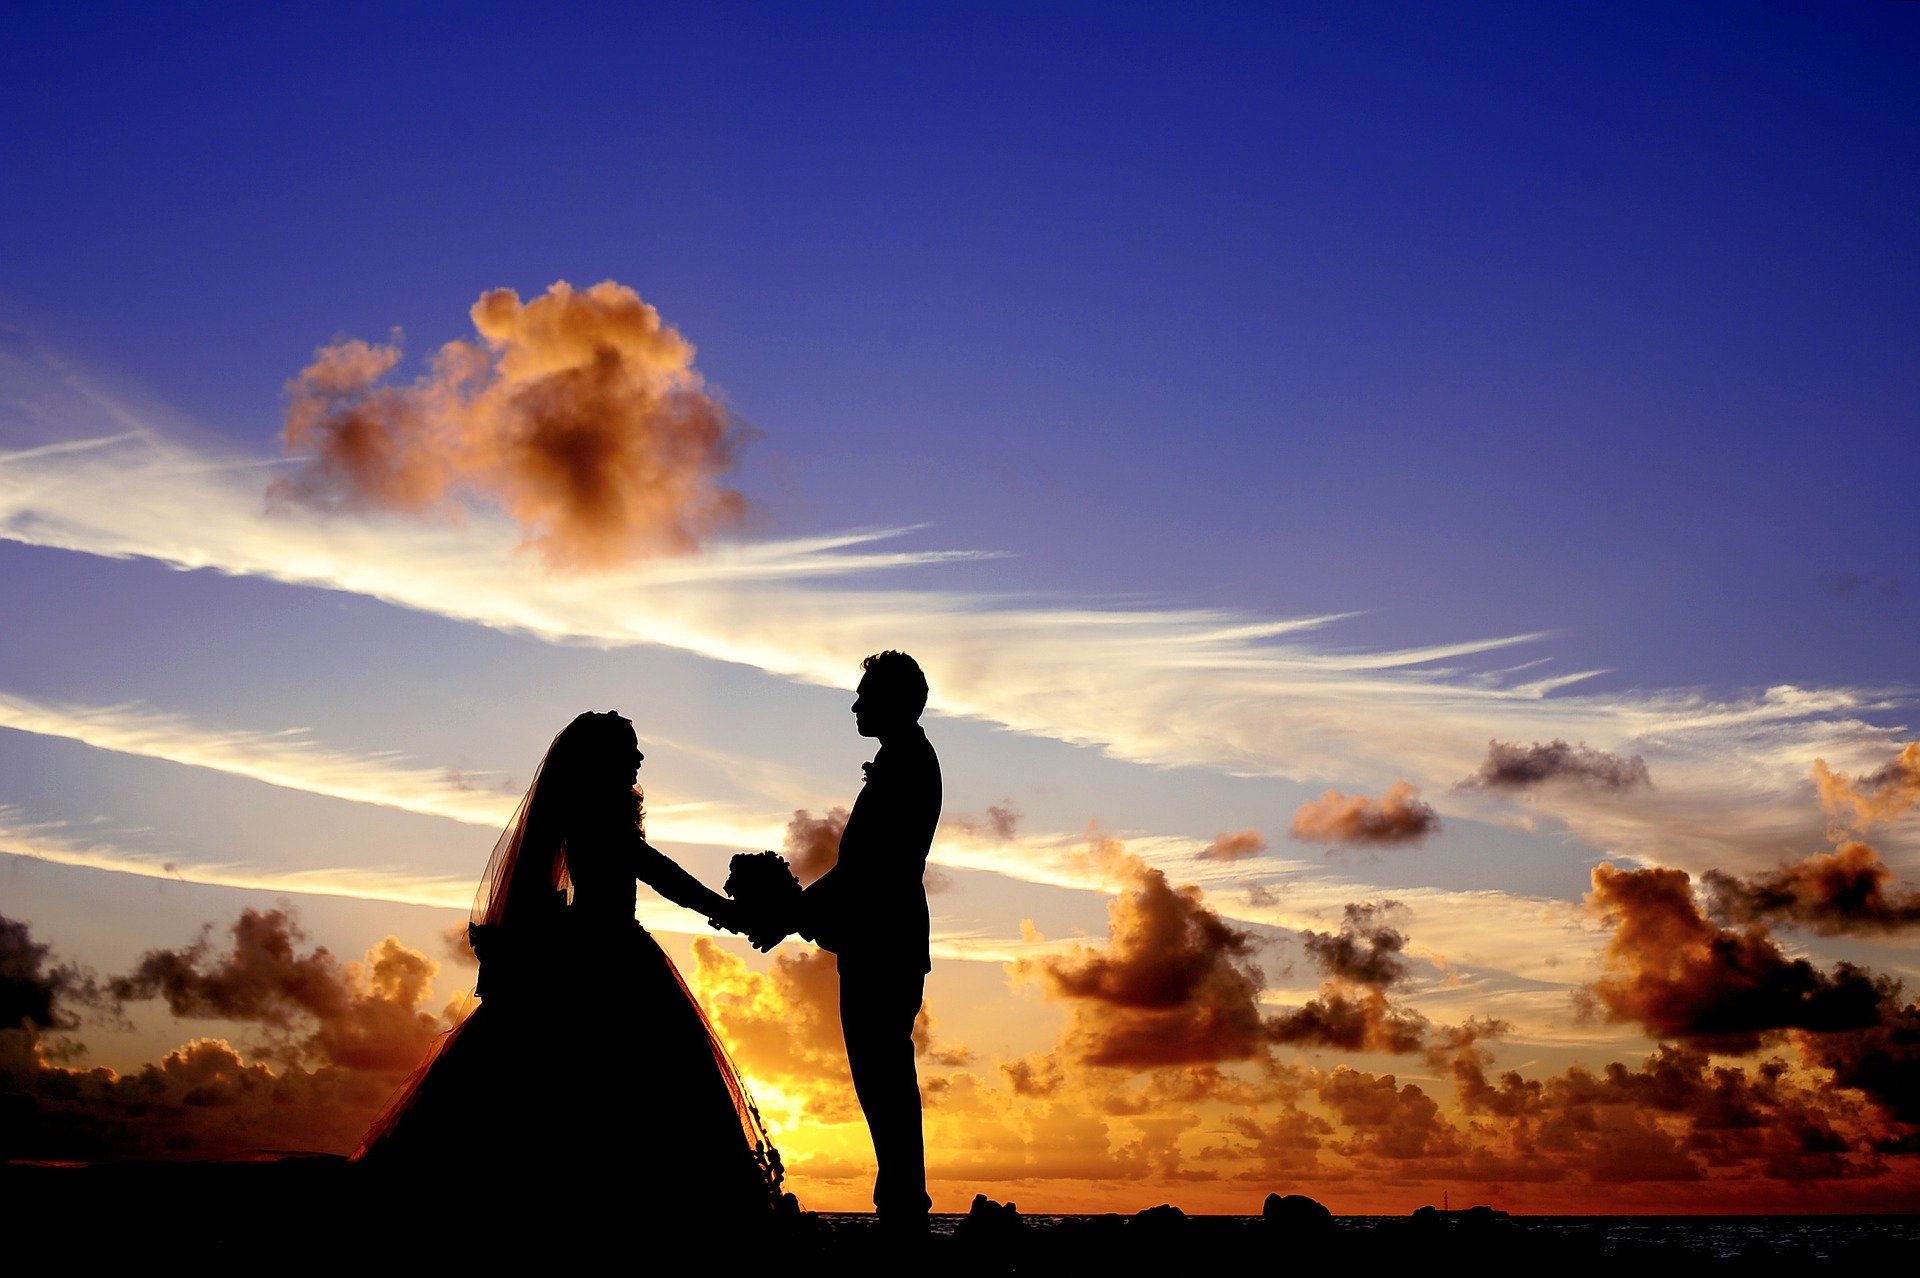 A couple getting married against the sunset. | Source: Pixabay.